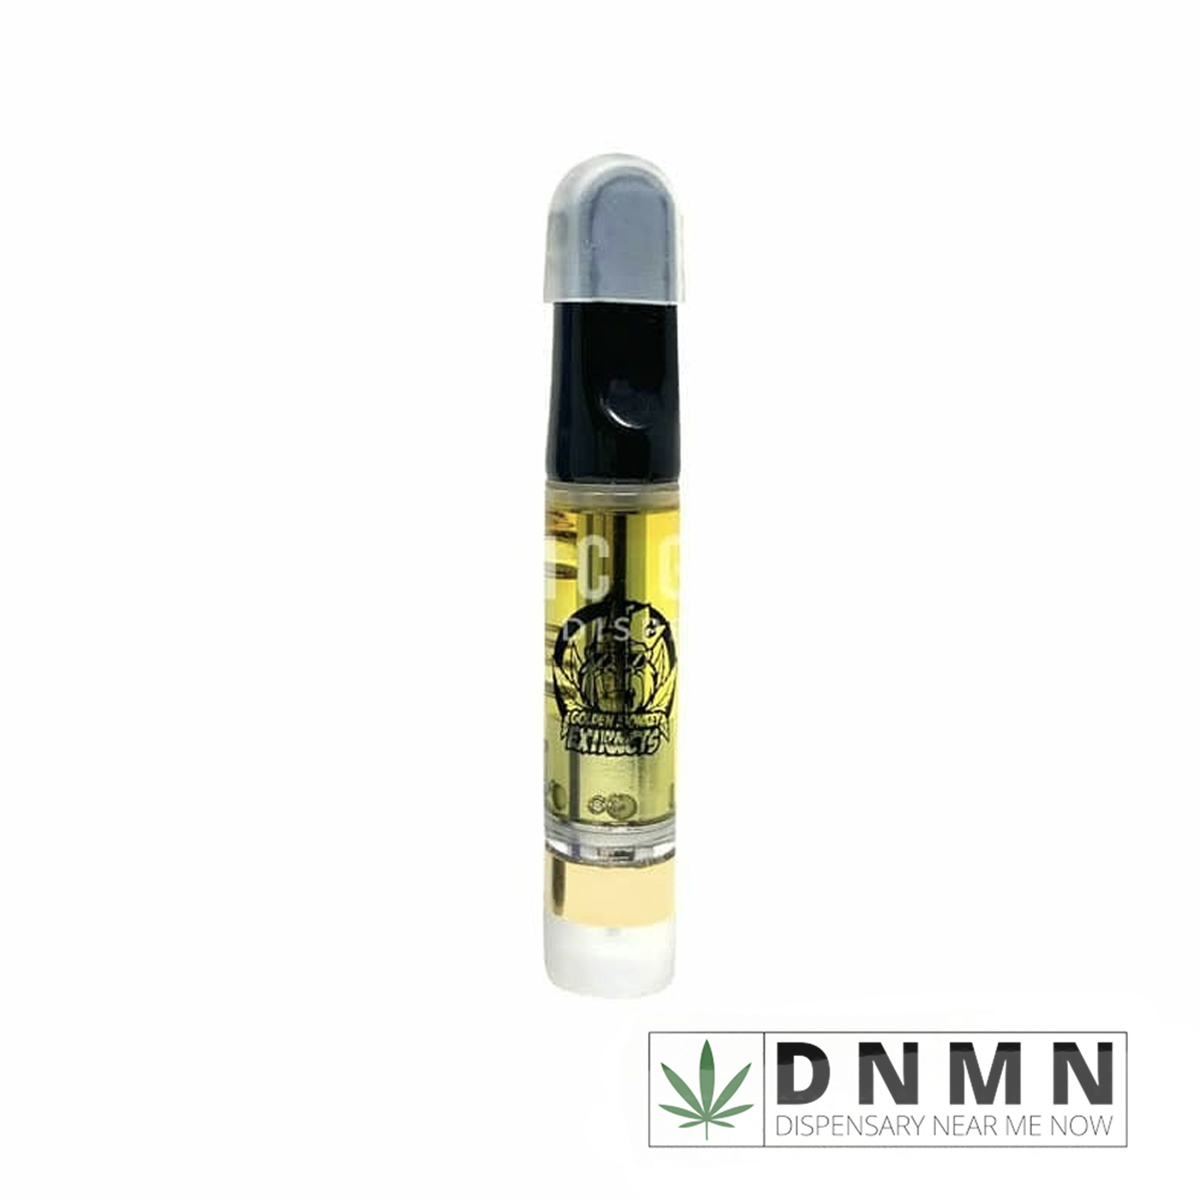 Golden Monkey Extracts - Raw (Flavourless) Cartridge | Buy Vapes Online | Dispensary Near Me